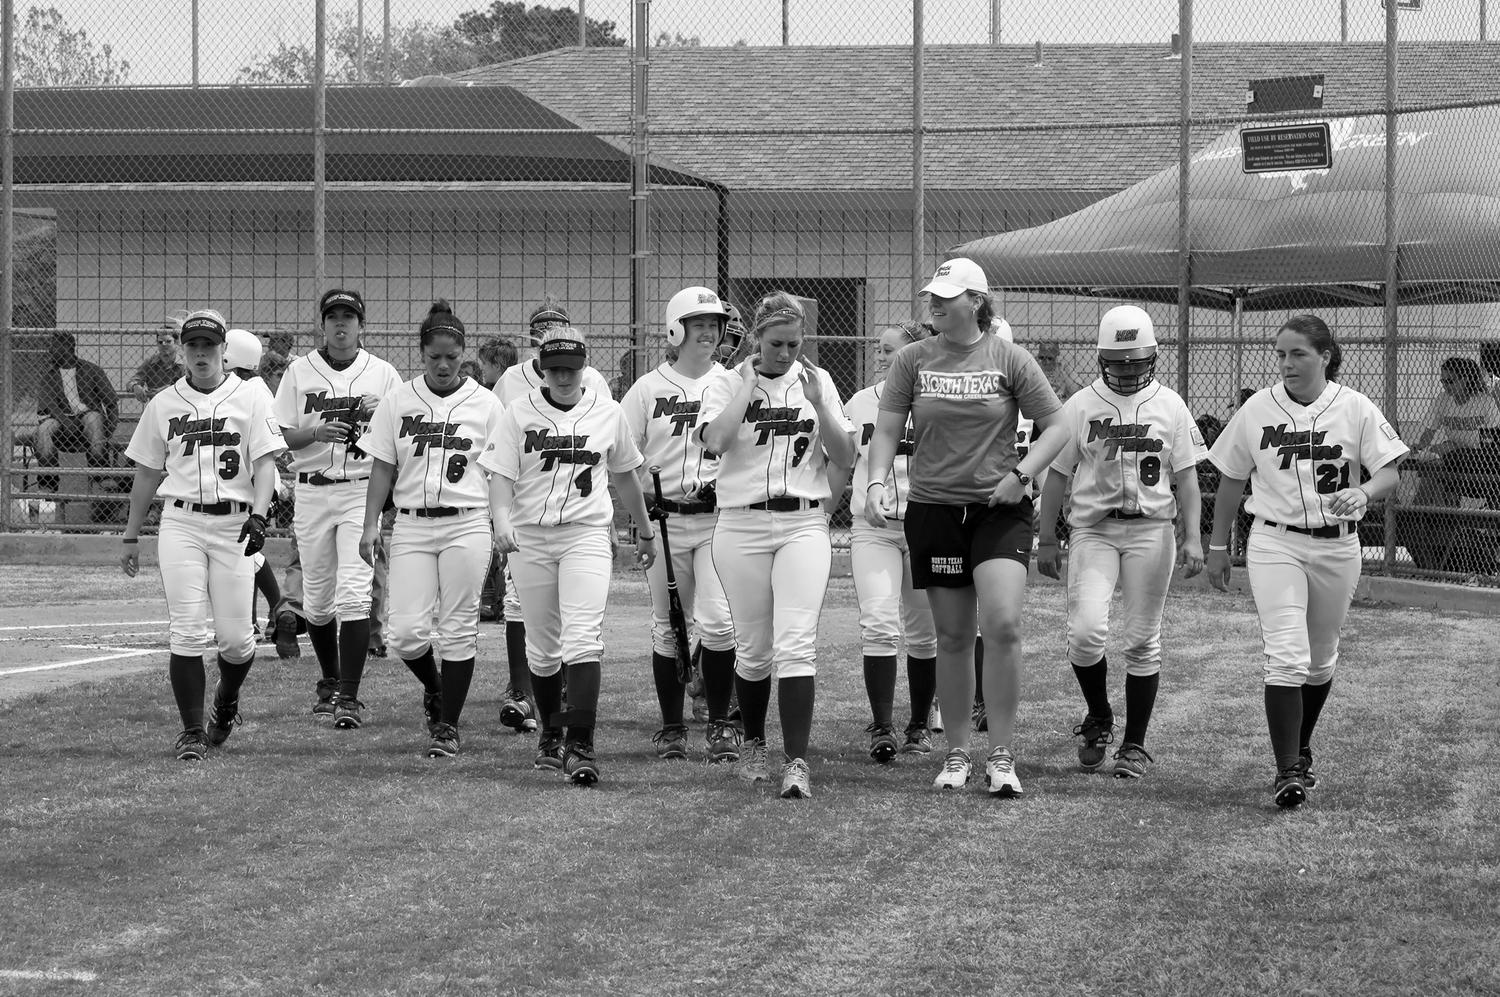 [2005-2006 North Texas softball team on the field]
                                                
                                                    [Sequence #]: 1 of 1
                                                